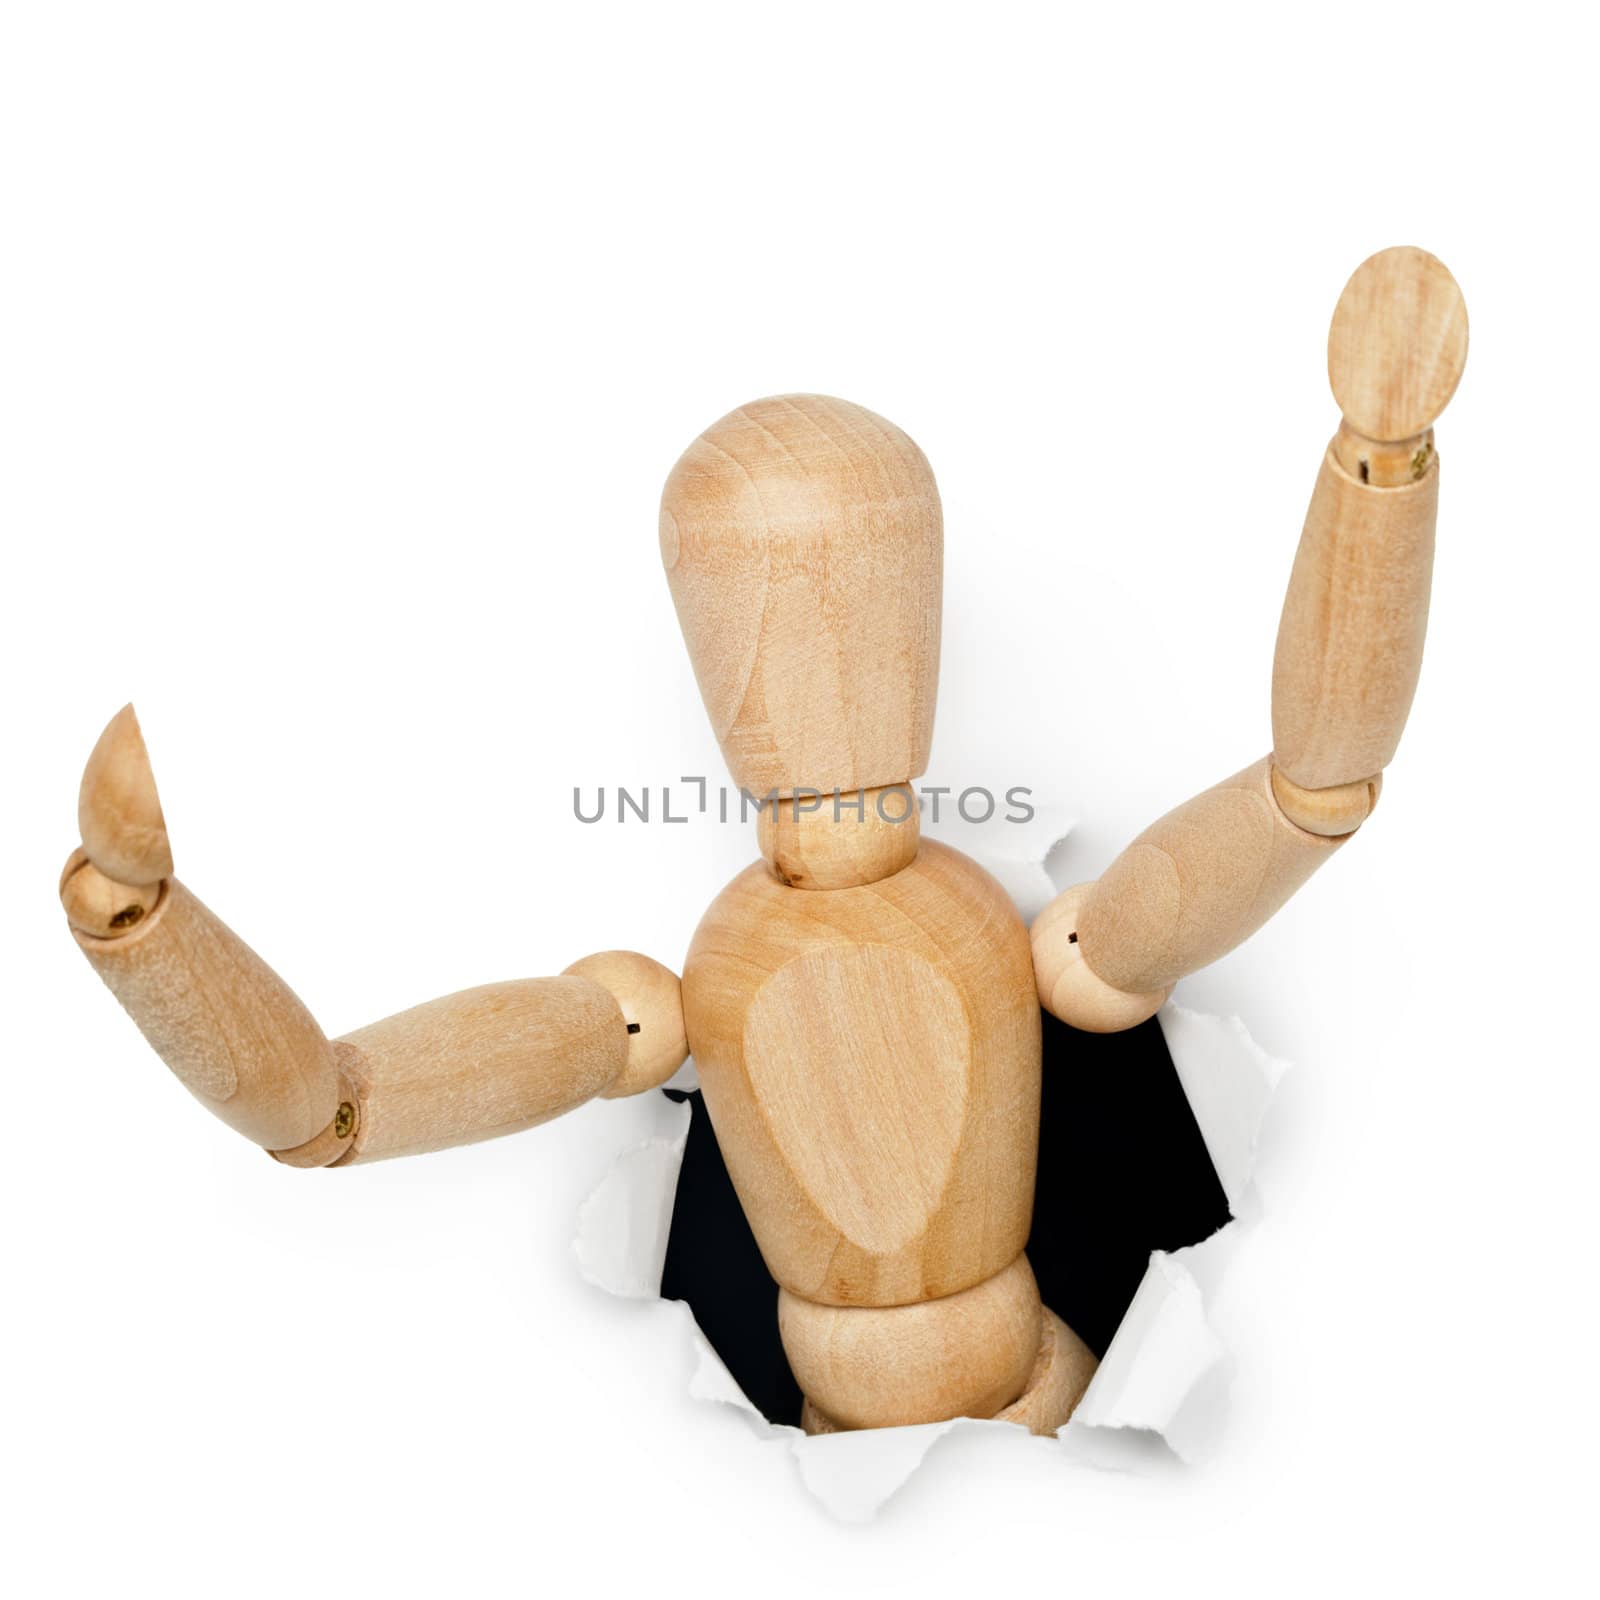 Wooden toy man looks out of the hole isolated on white background